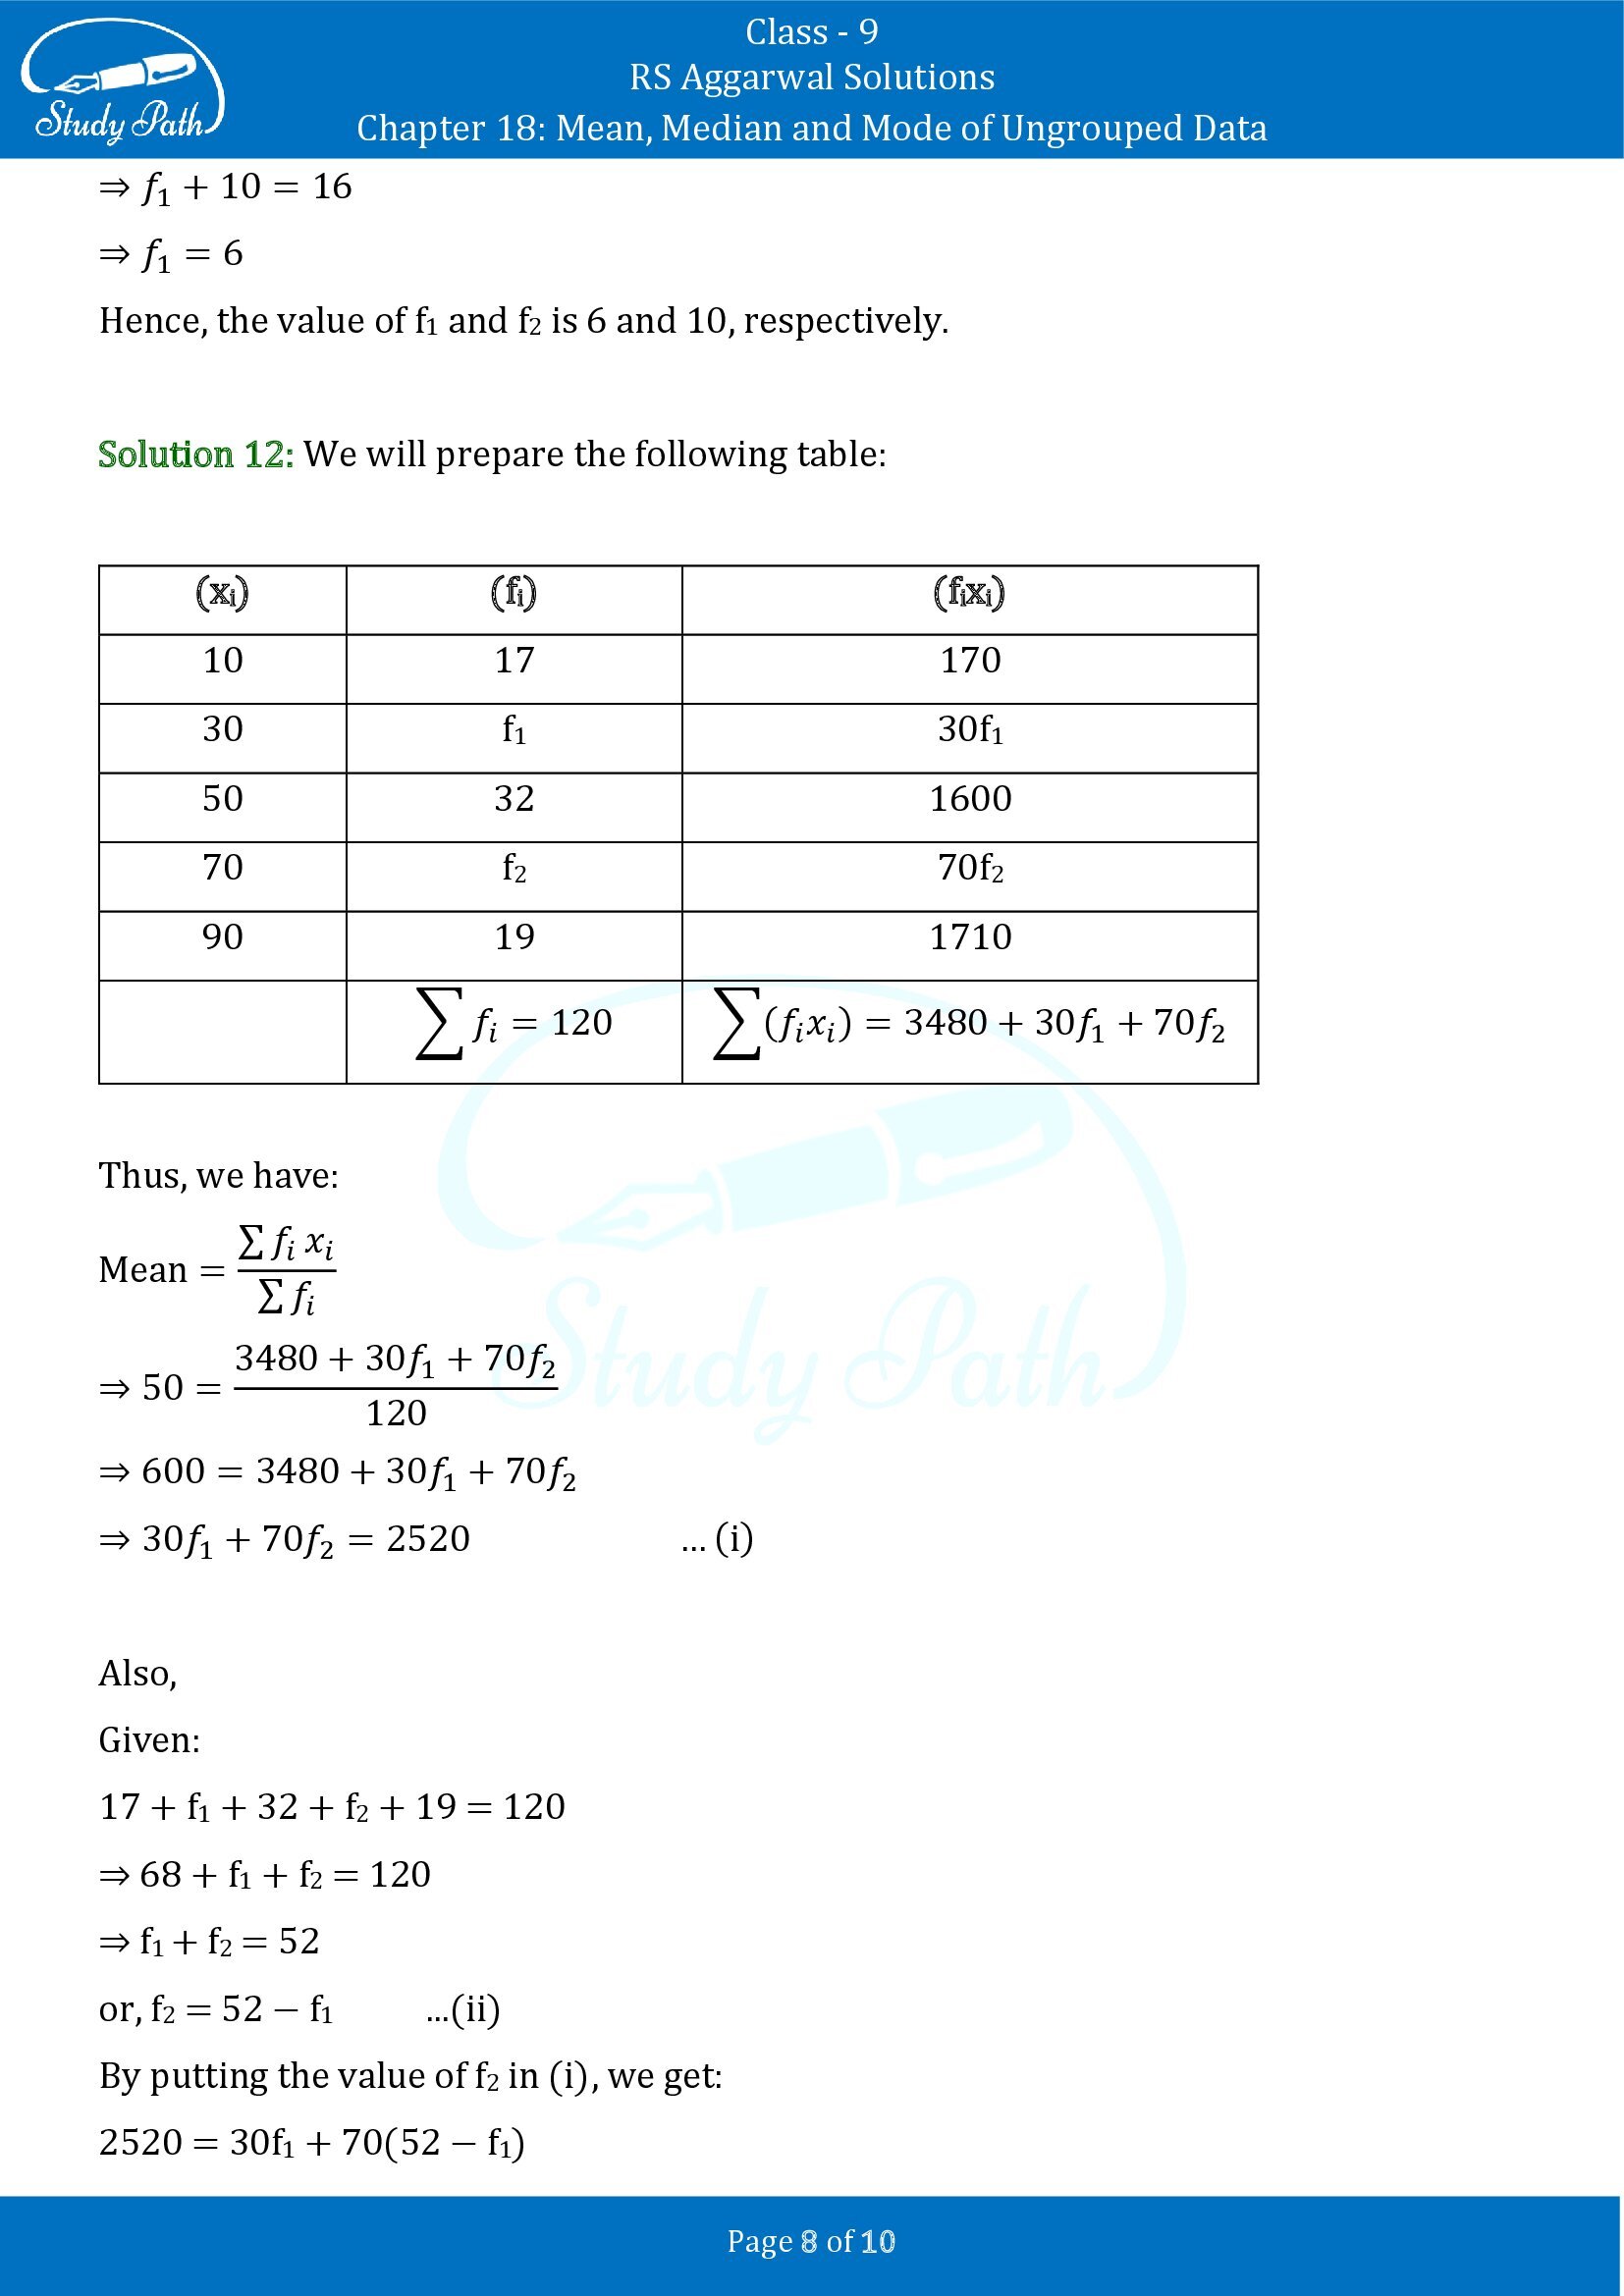 RS Aggarwal Solutions Class 9 Chapter 18 Mean Median and Mode of Ungrouped Data Exercise 18B 00008